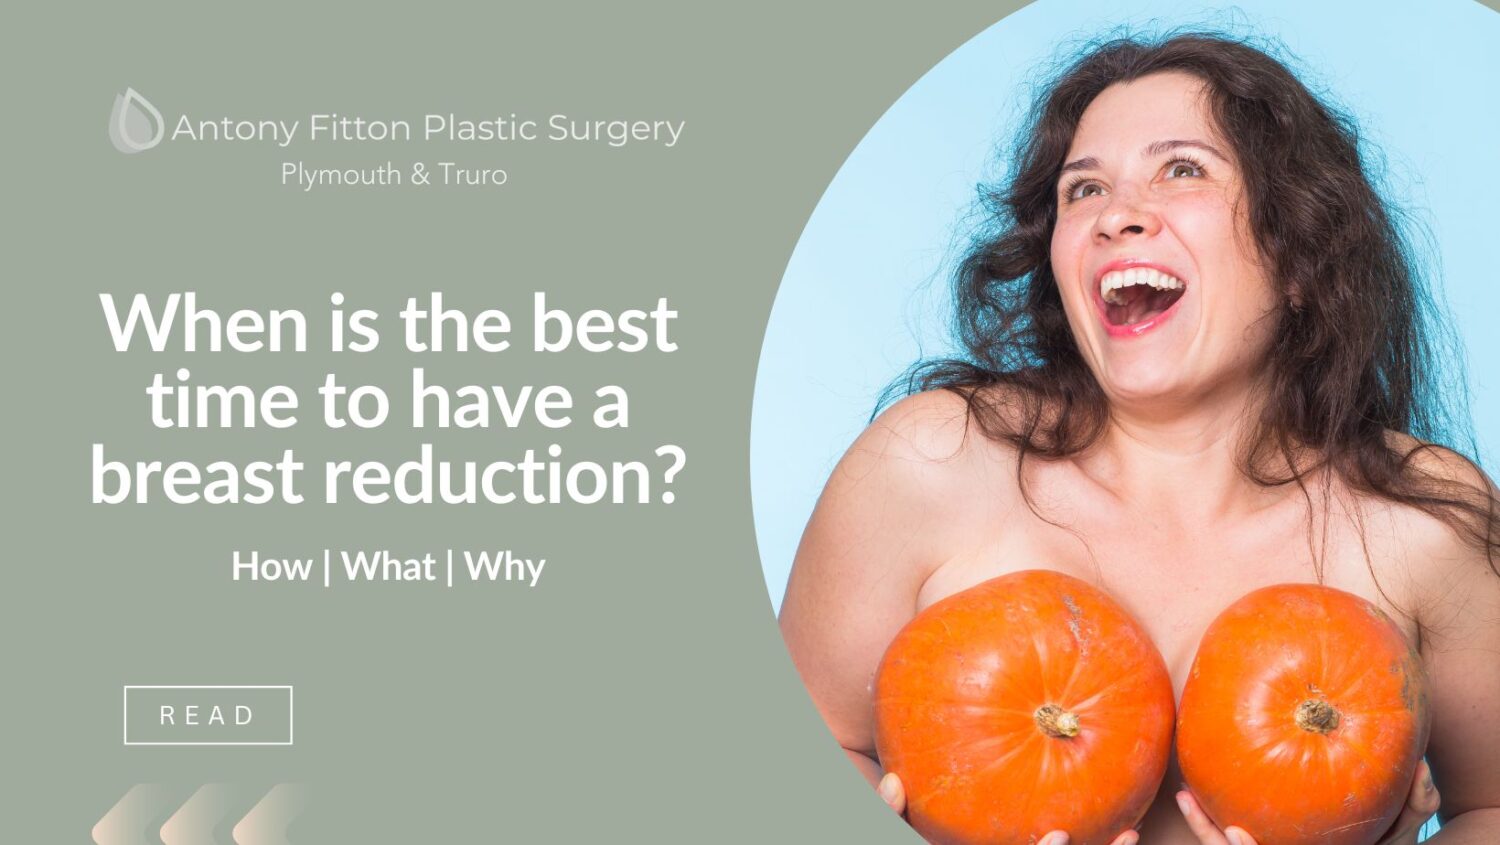 When is the best time to have a breast reduction?